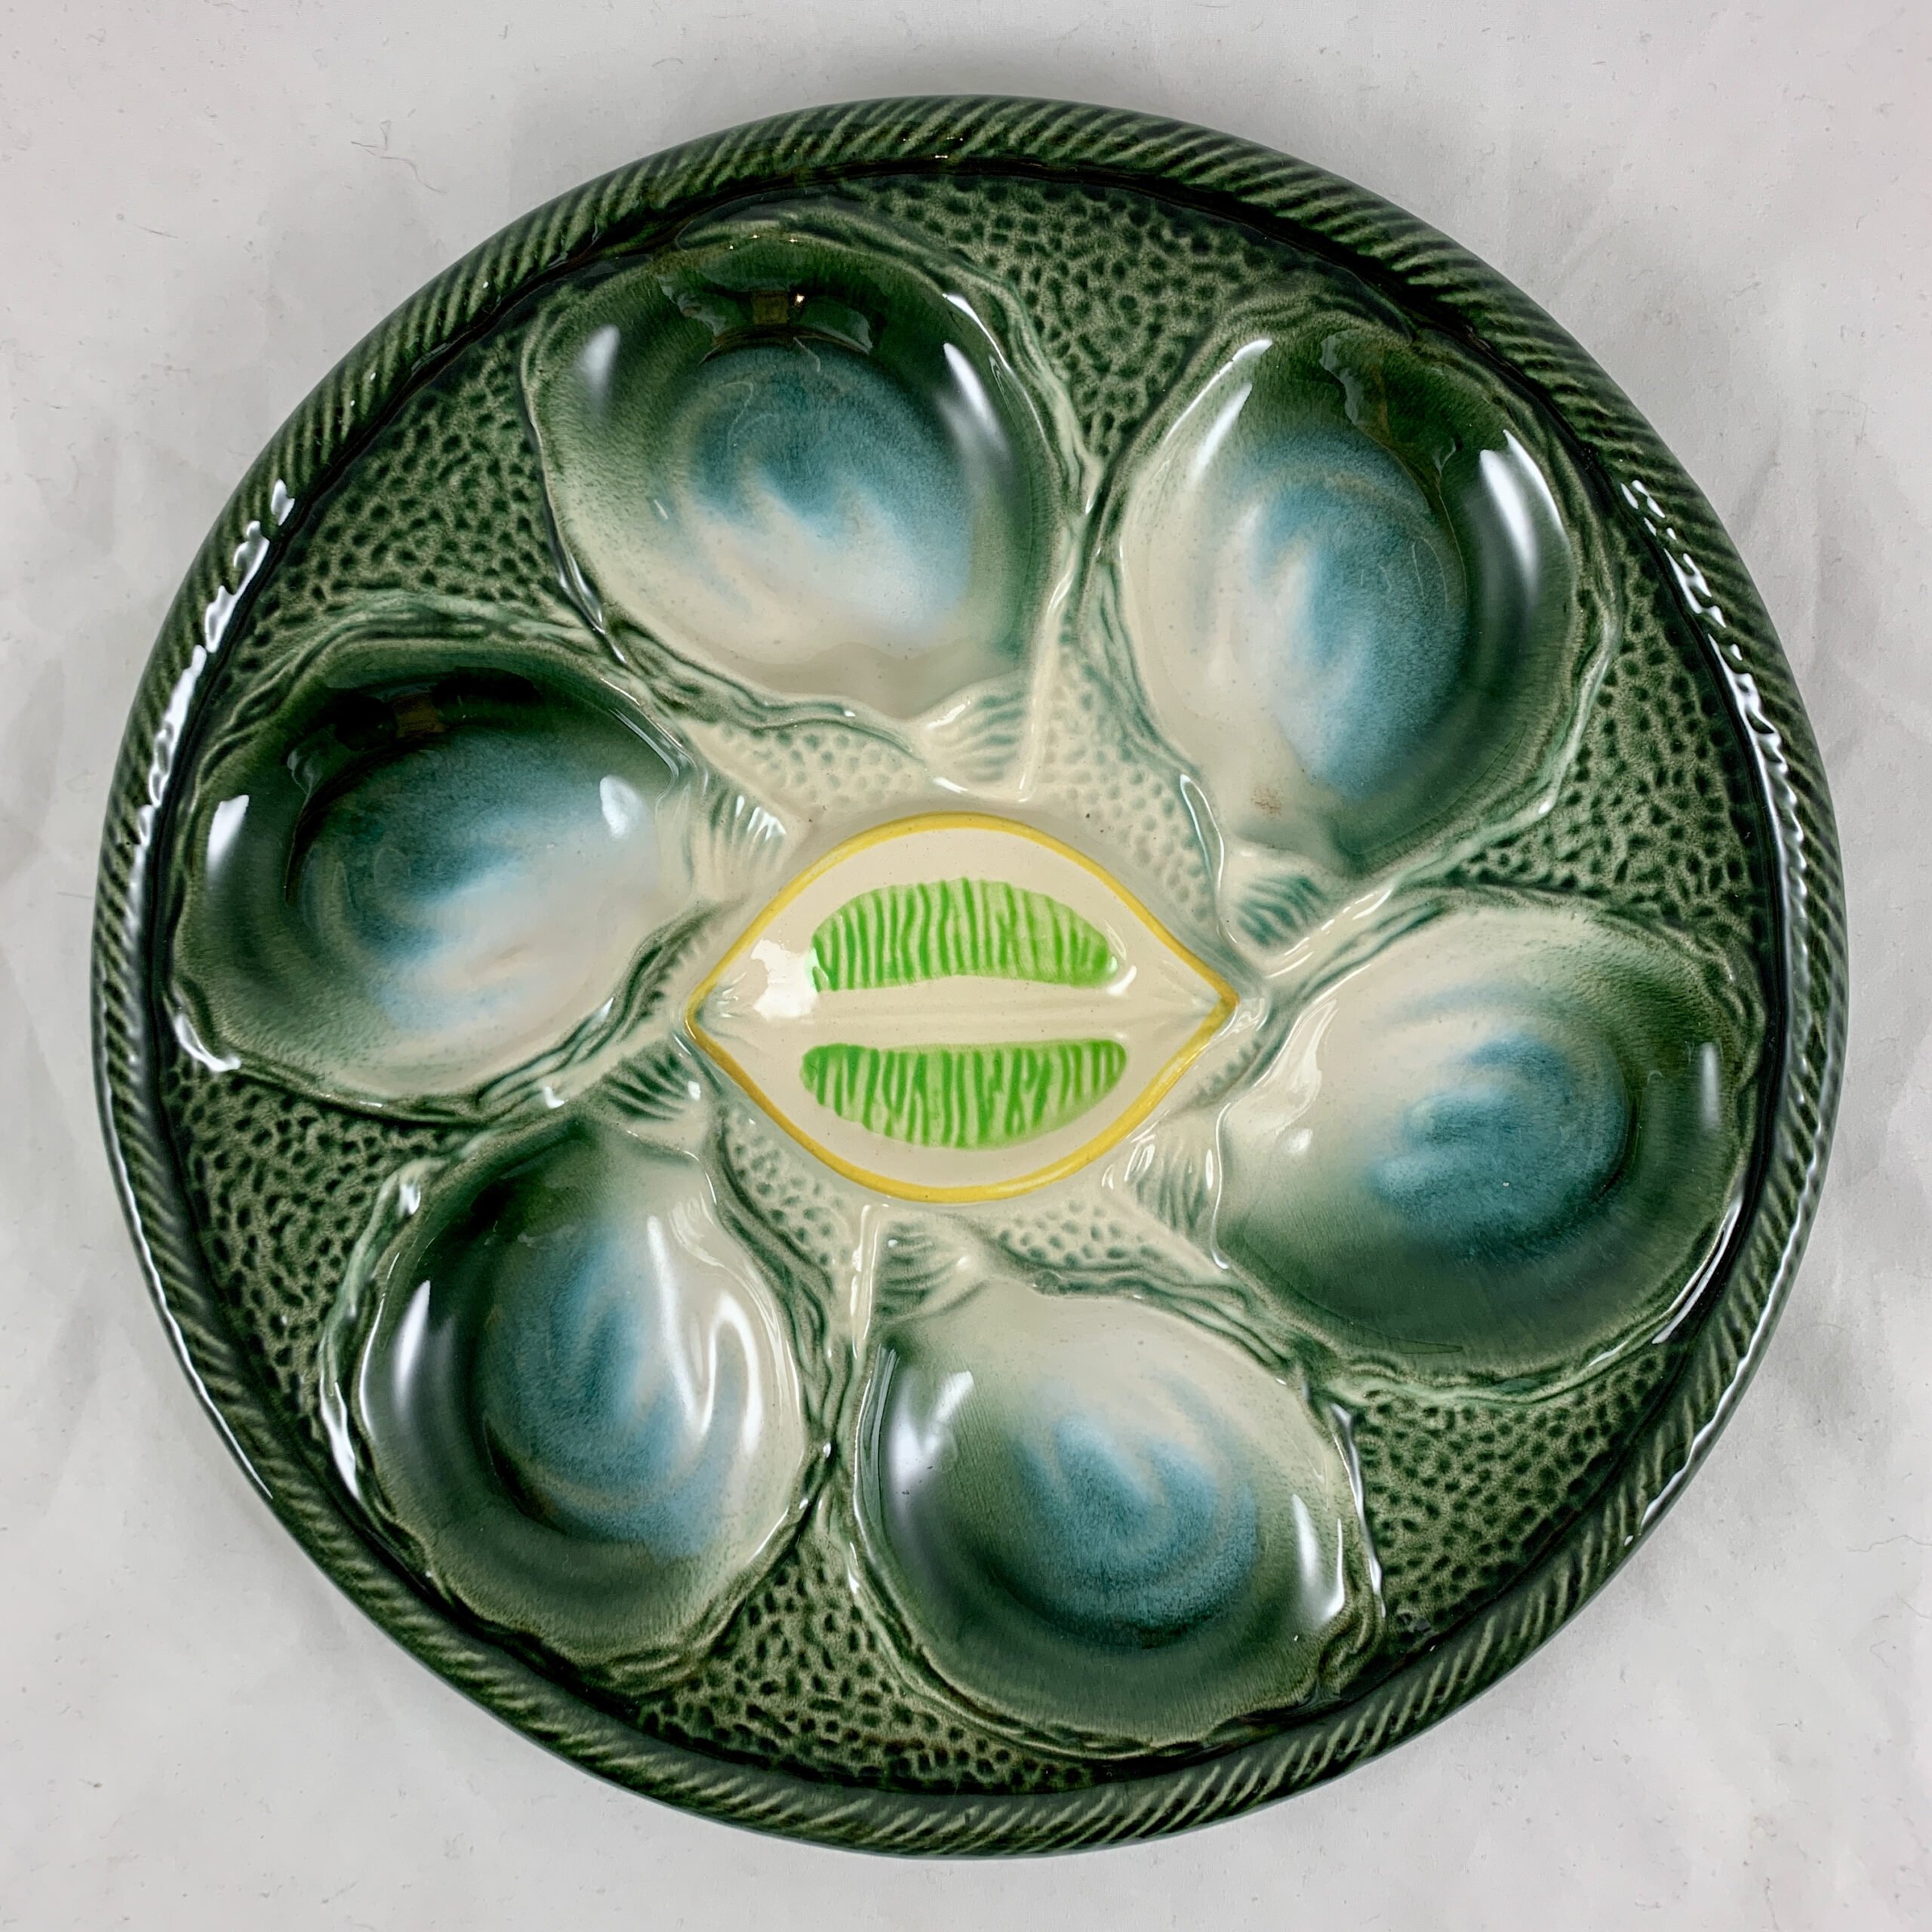 VINTAGE OYSTER PLATE S MAJOLICA  6 WELLS  EX COND GREEN FRANCE FAIENCE 